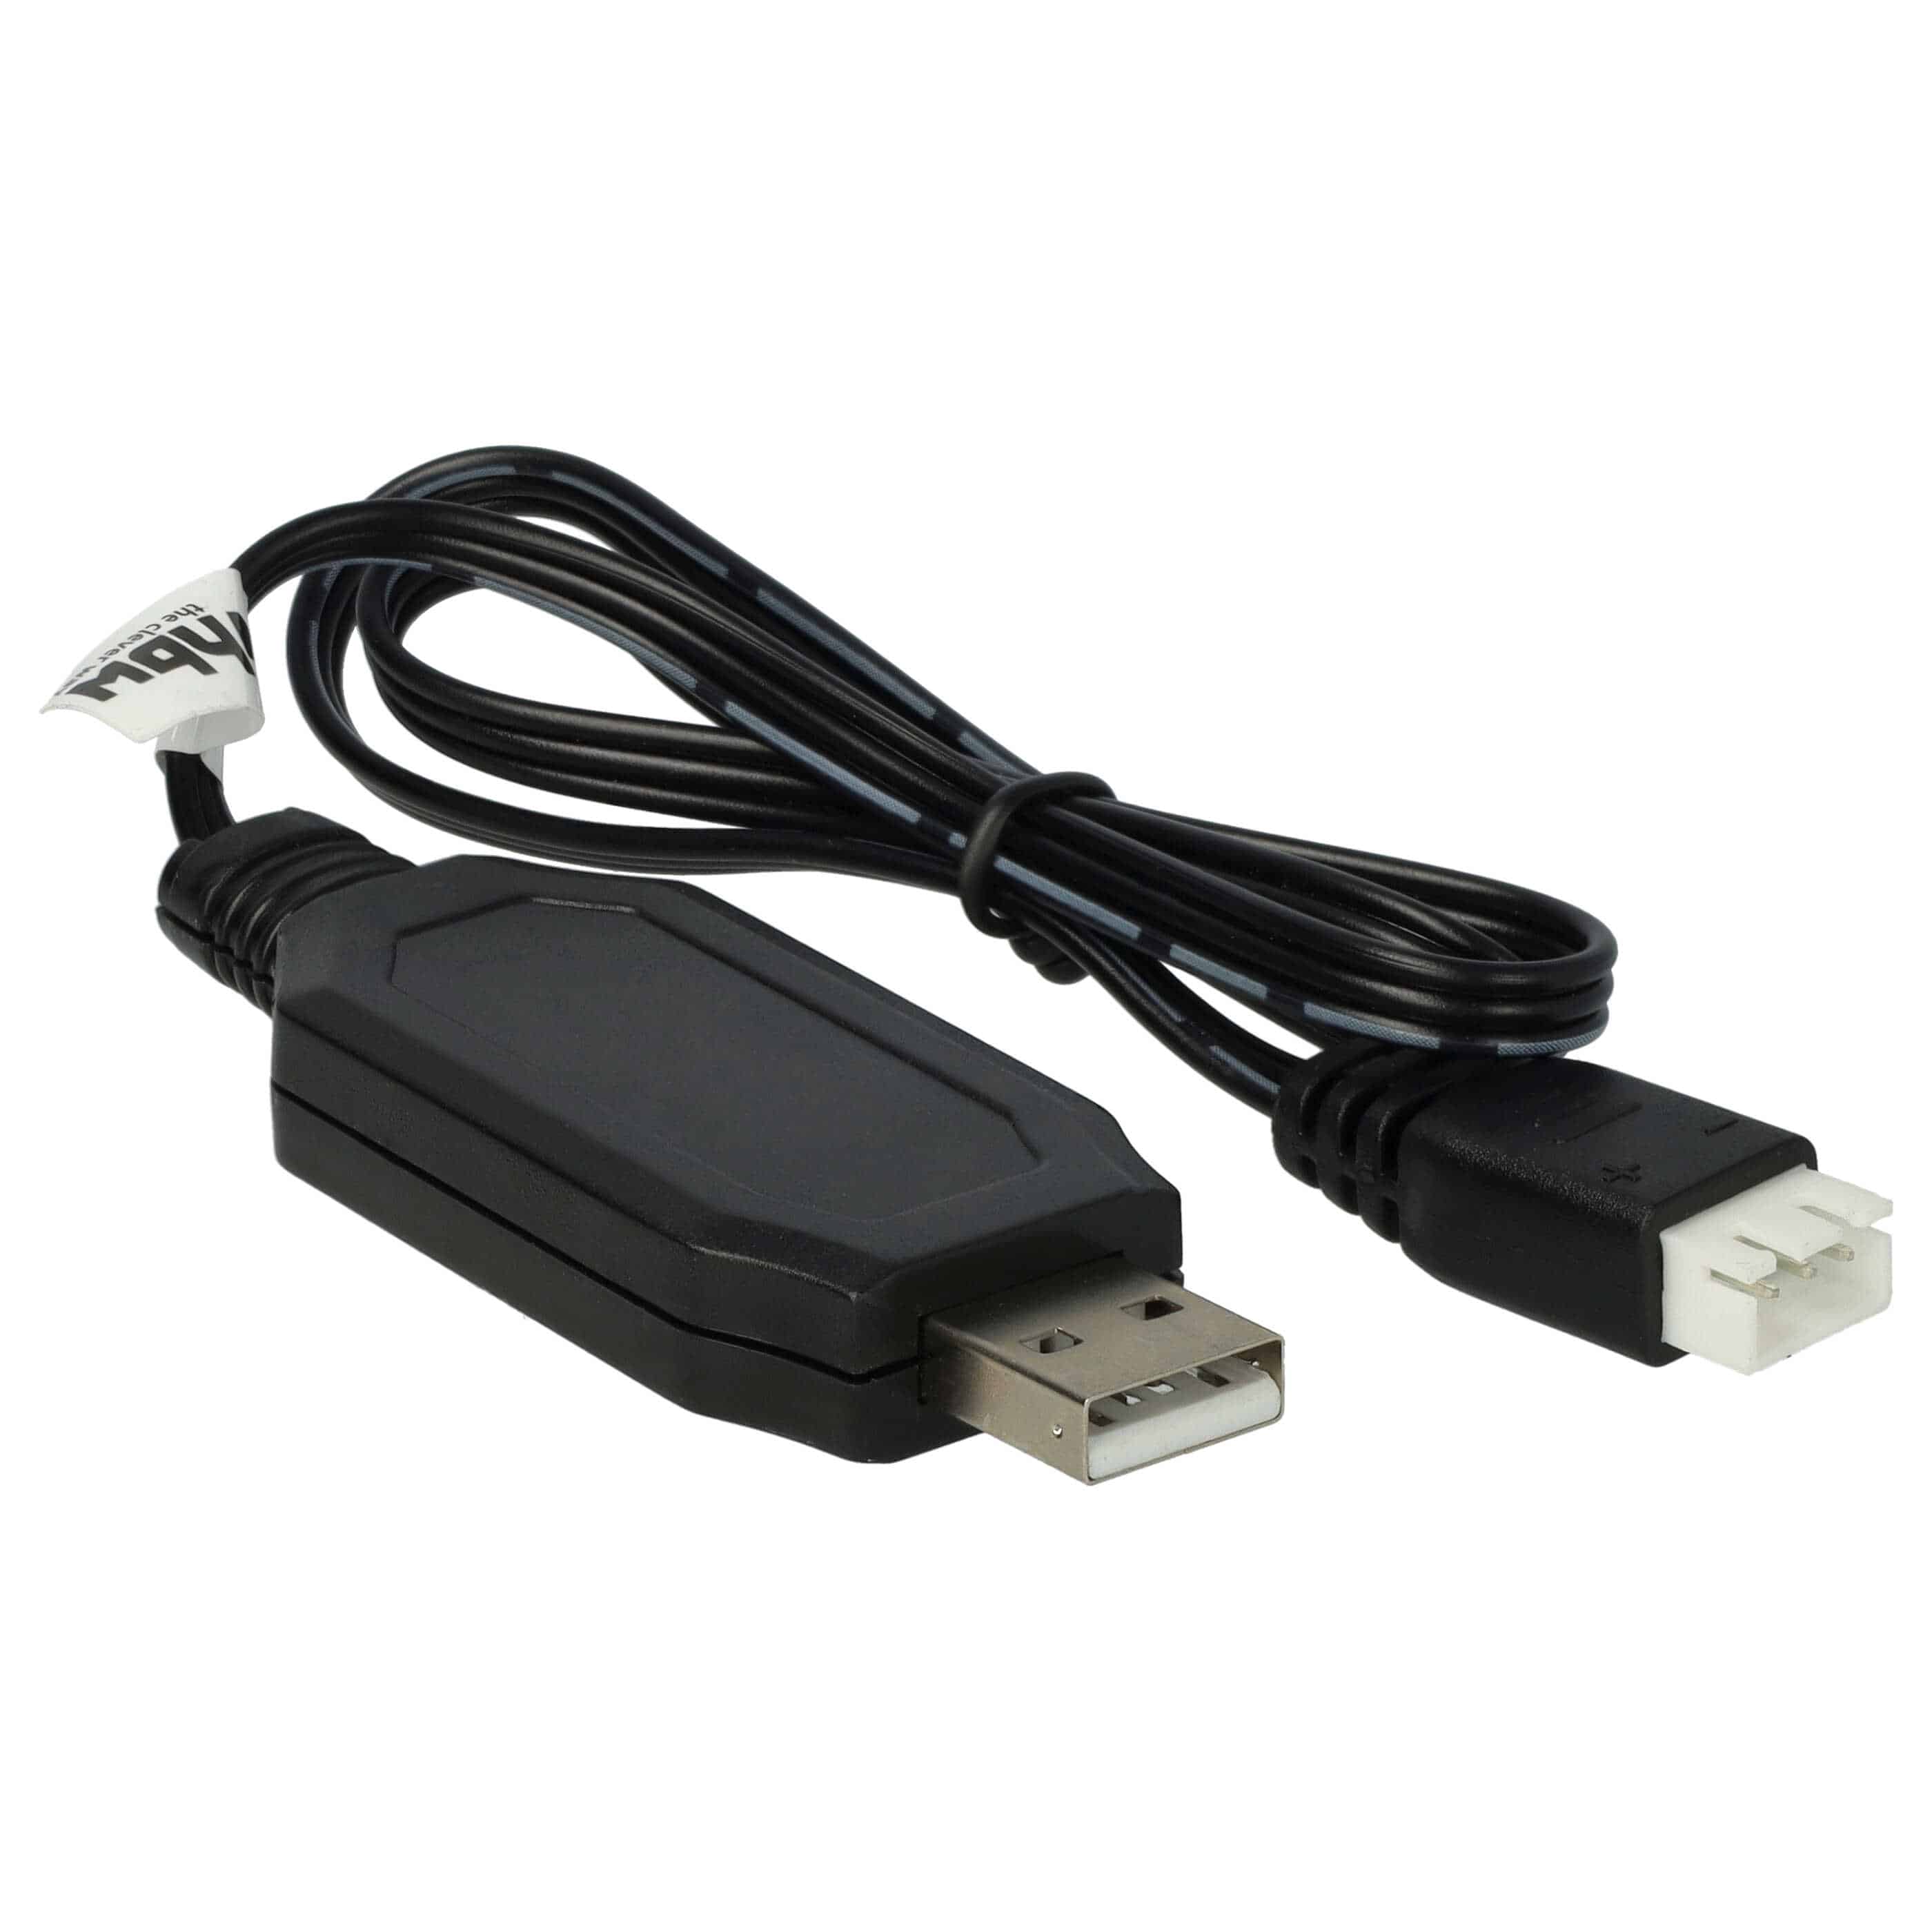 USB Charging Cable suitable for RC Batteries with JST XH-3P Connector, RC Model Making Battery Packs - 60 cm 4